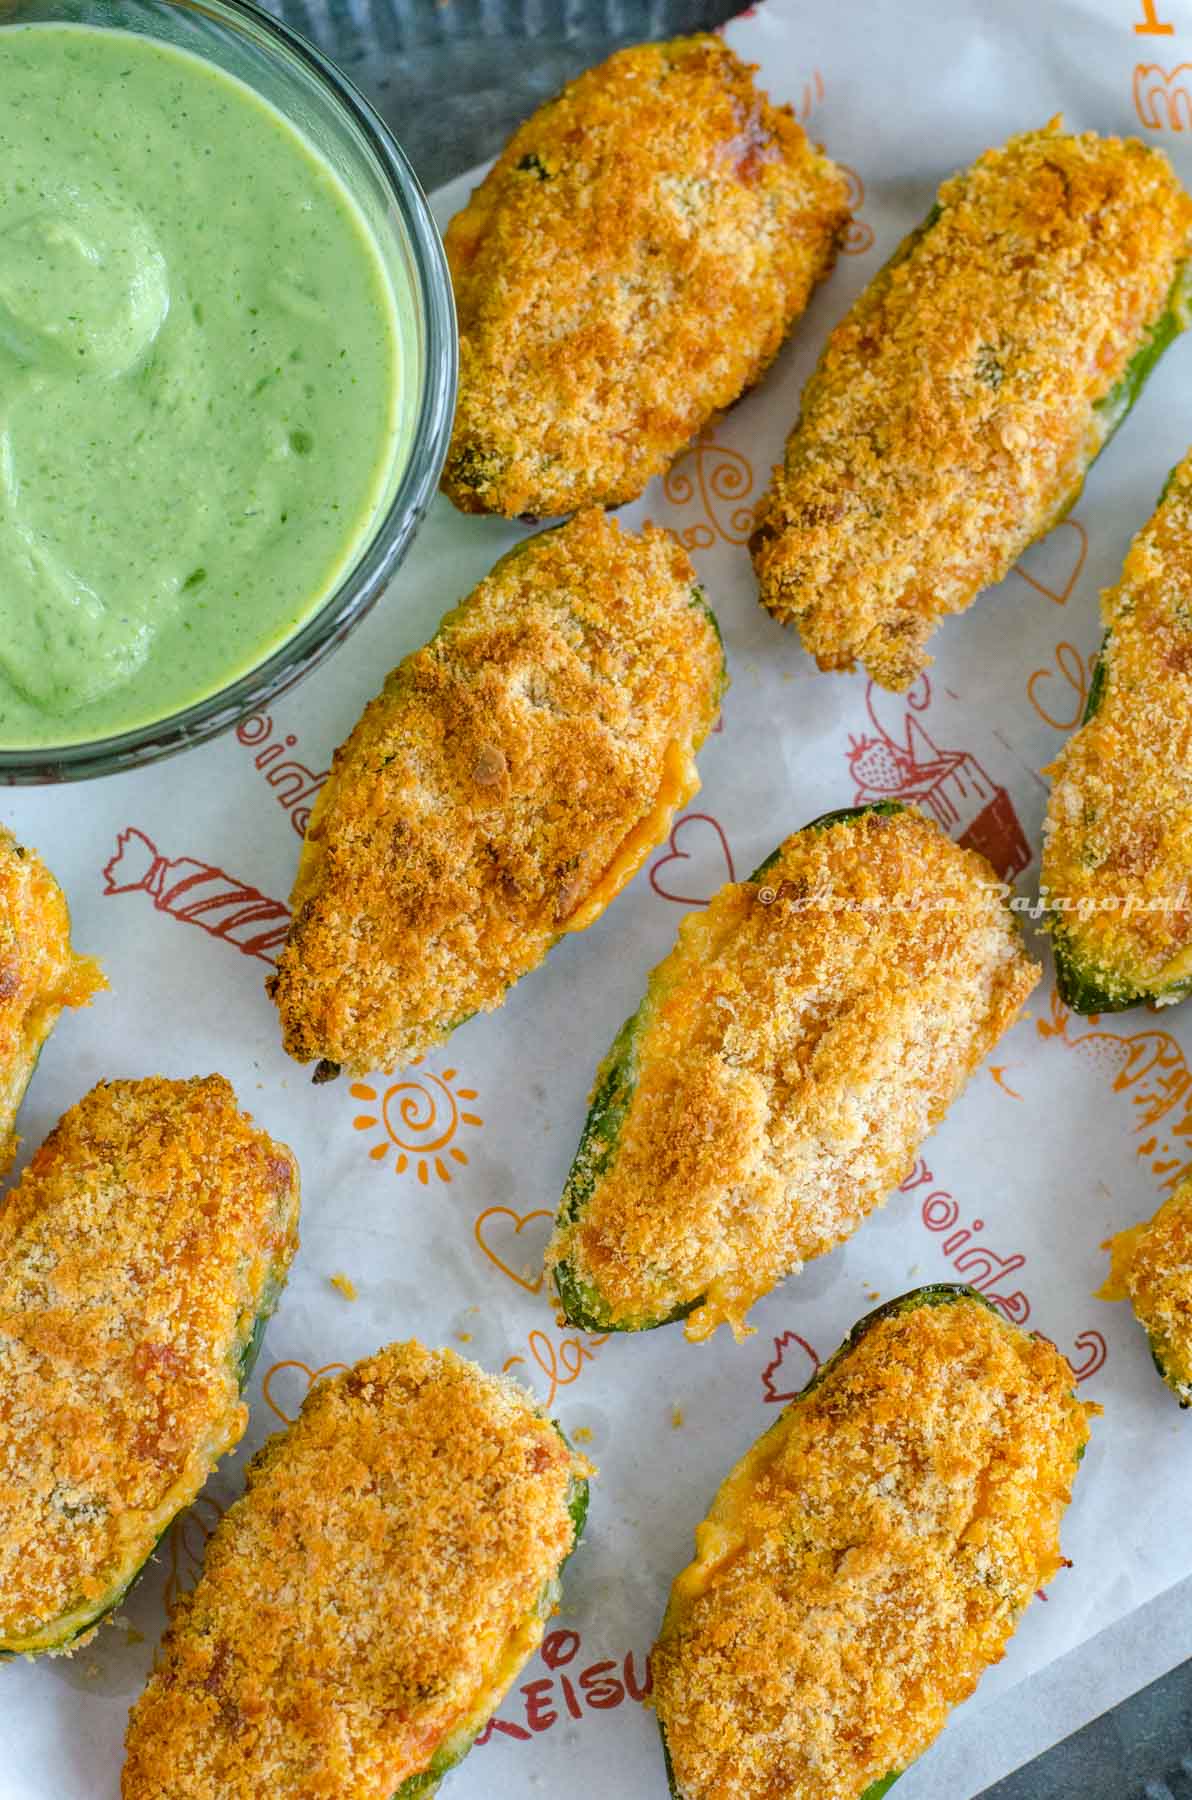 jalapeno cheese poppers air fried and served with a vegan ranch dip. These fried poppers are placed on a baking sheet laid out on a rustic metal tray.